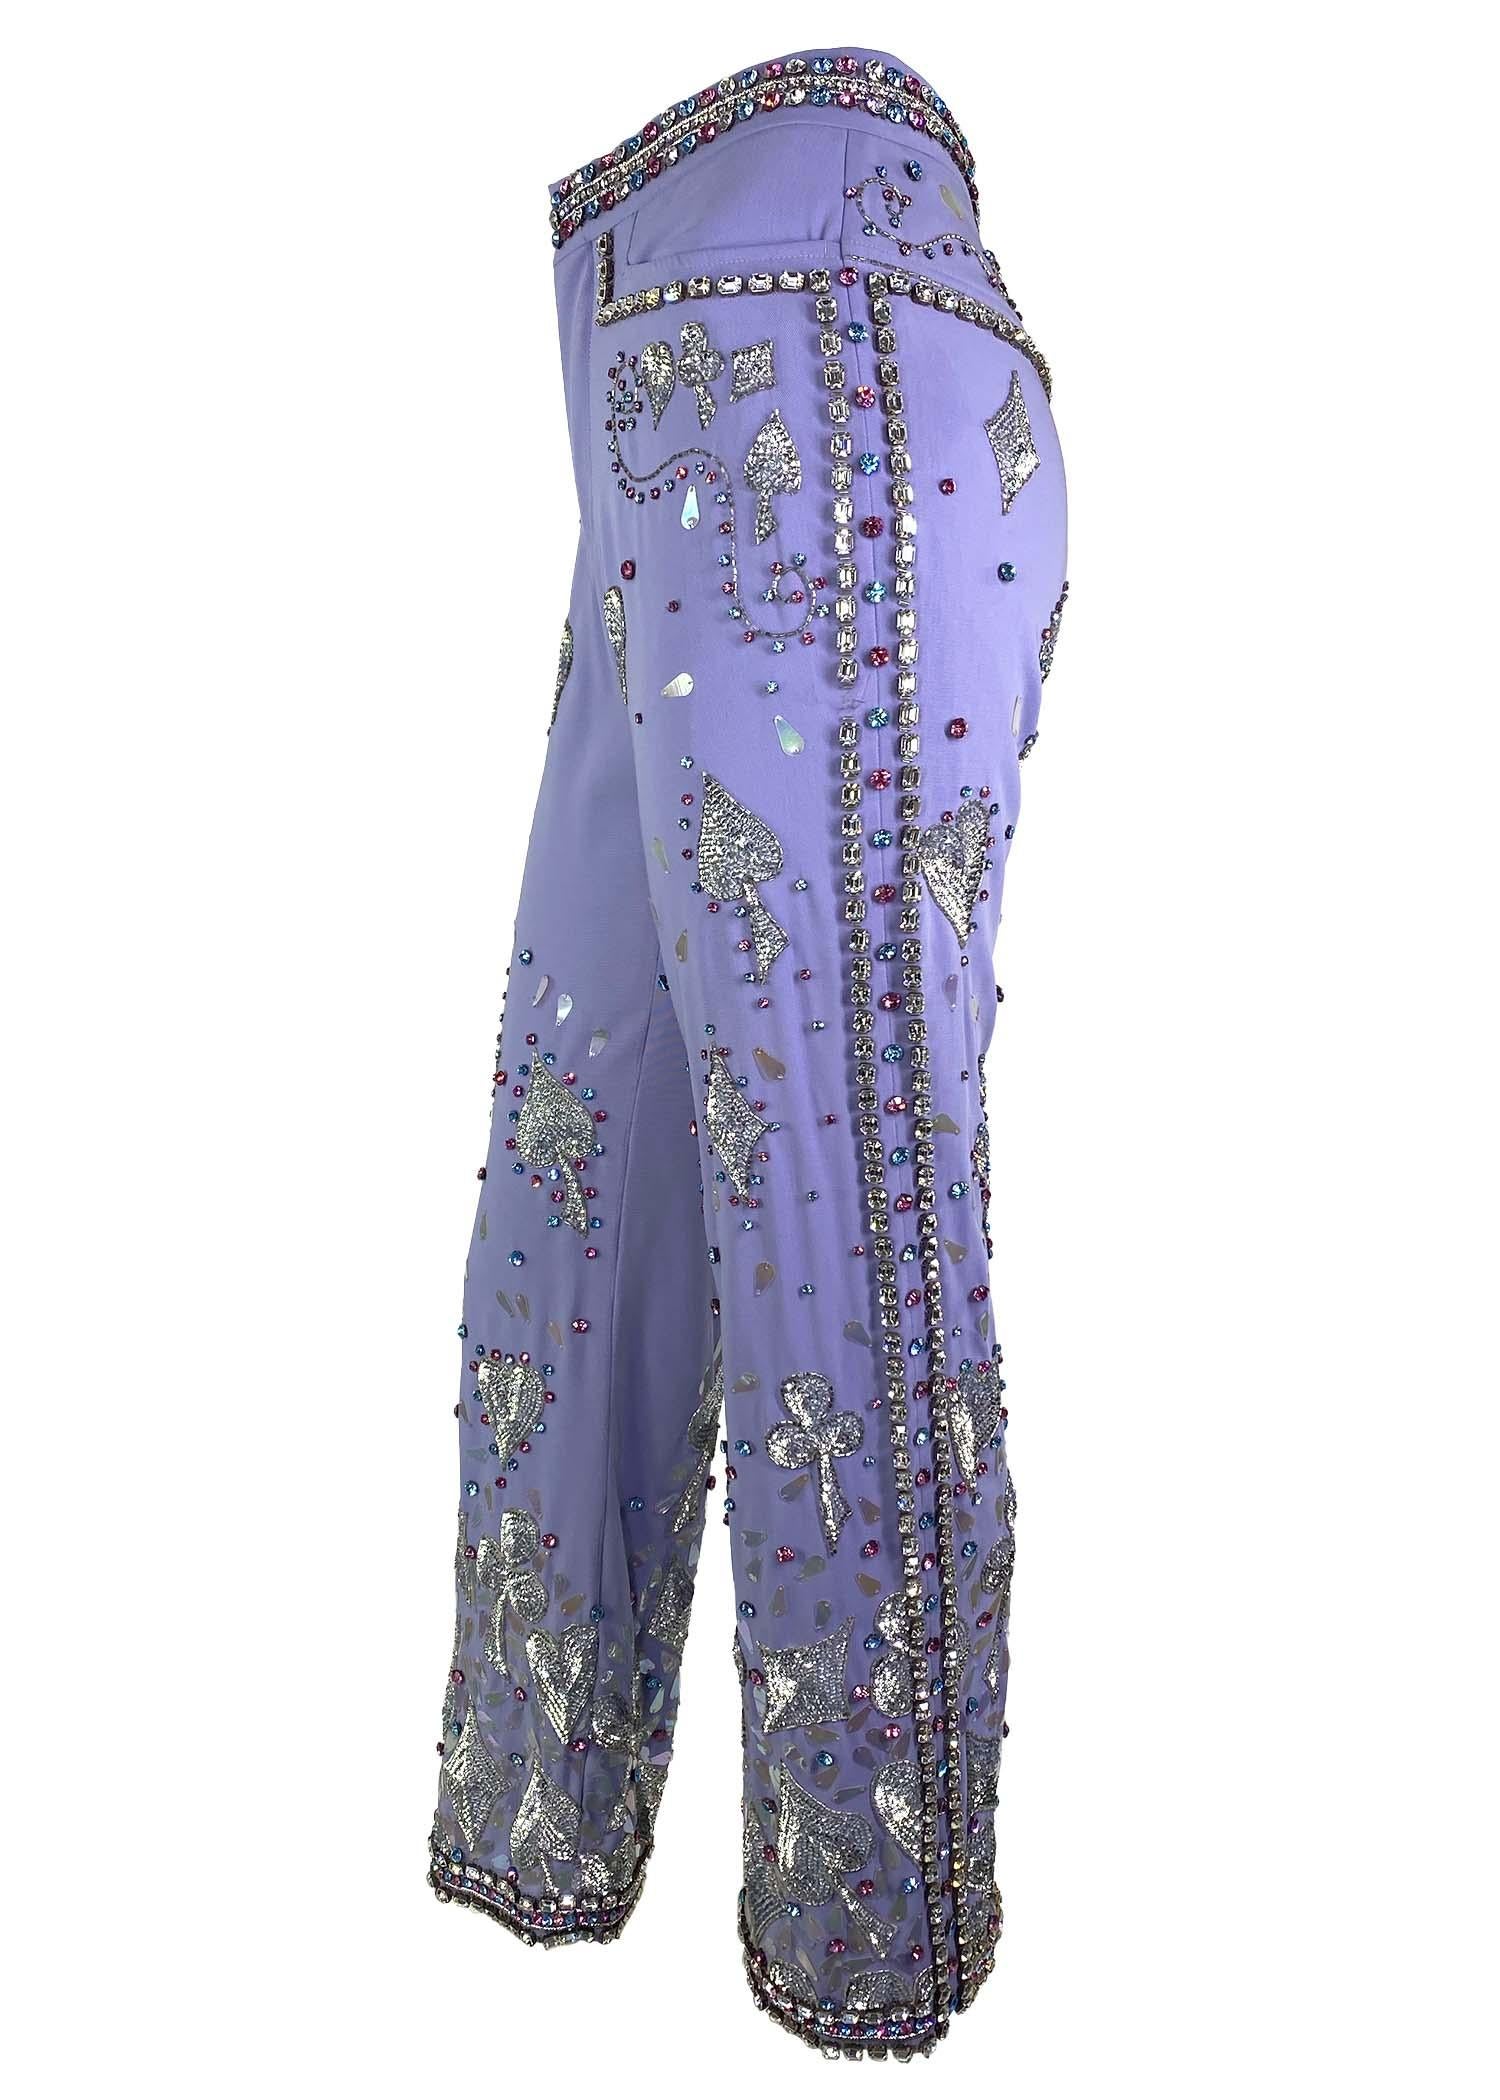 Women's S/S 1999 Gucci by Tom Ford Madonna Runway Lucky Rhinestone Museum Pants Y2K For Sale